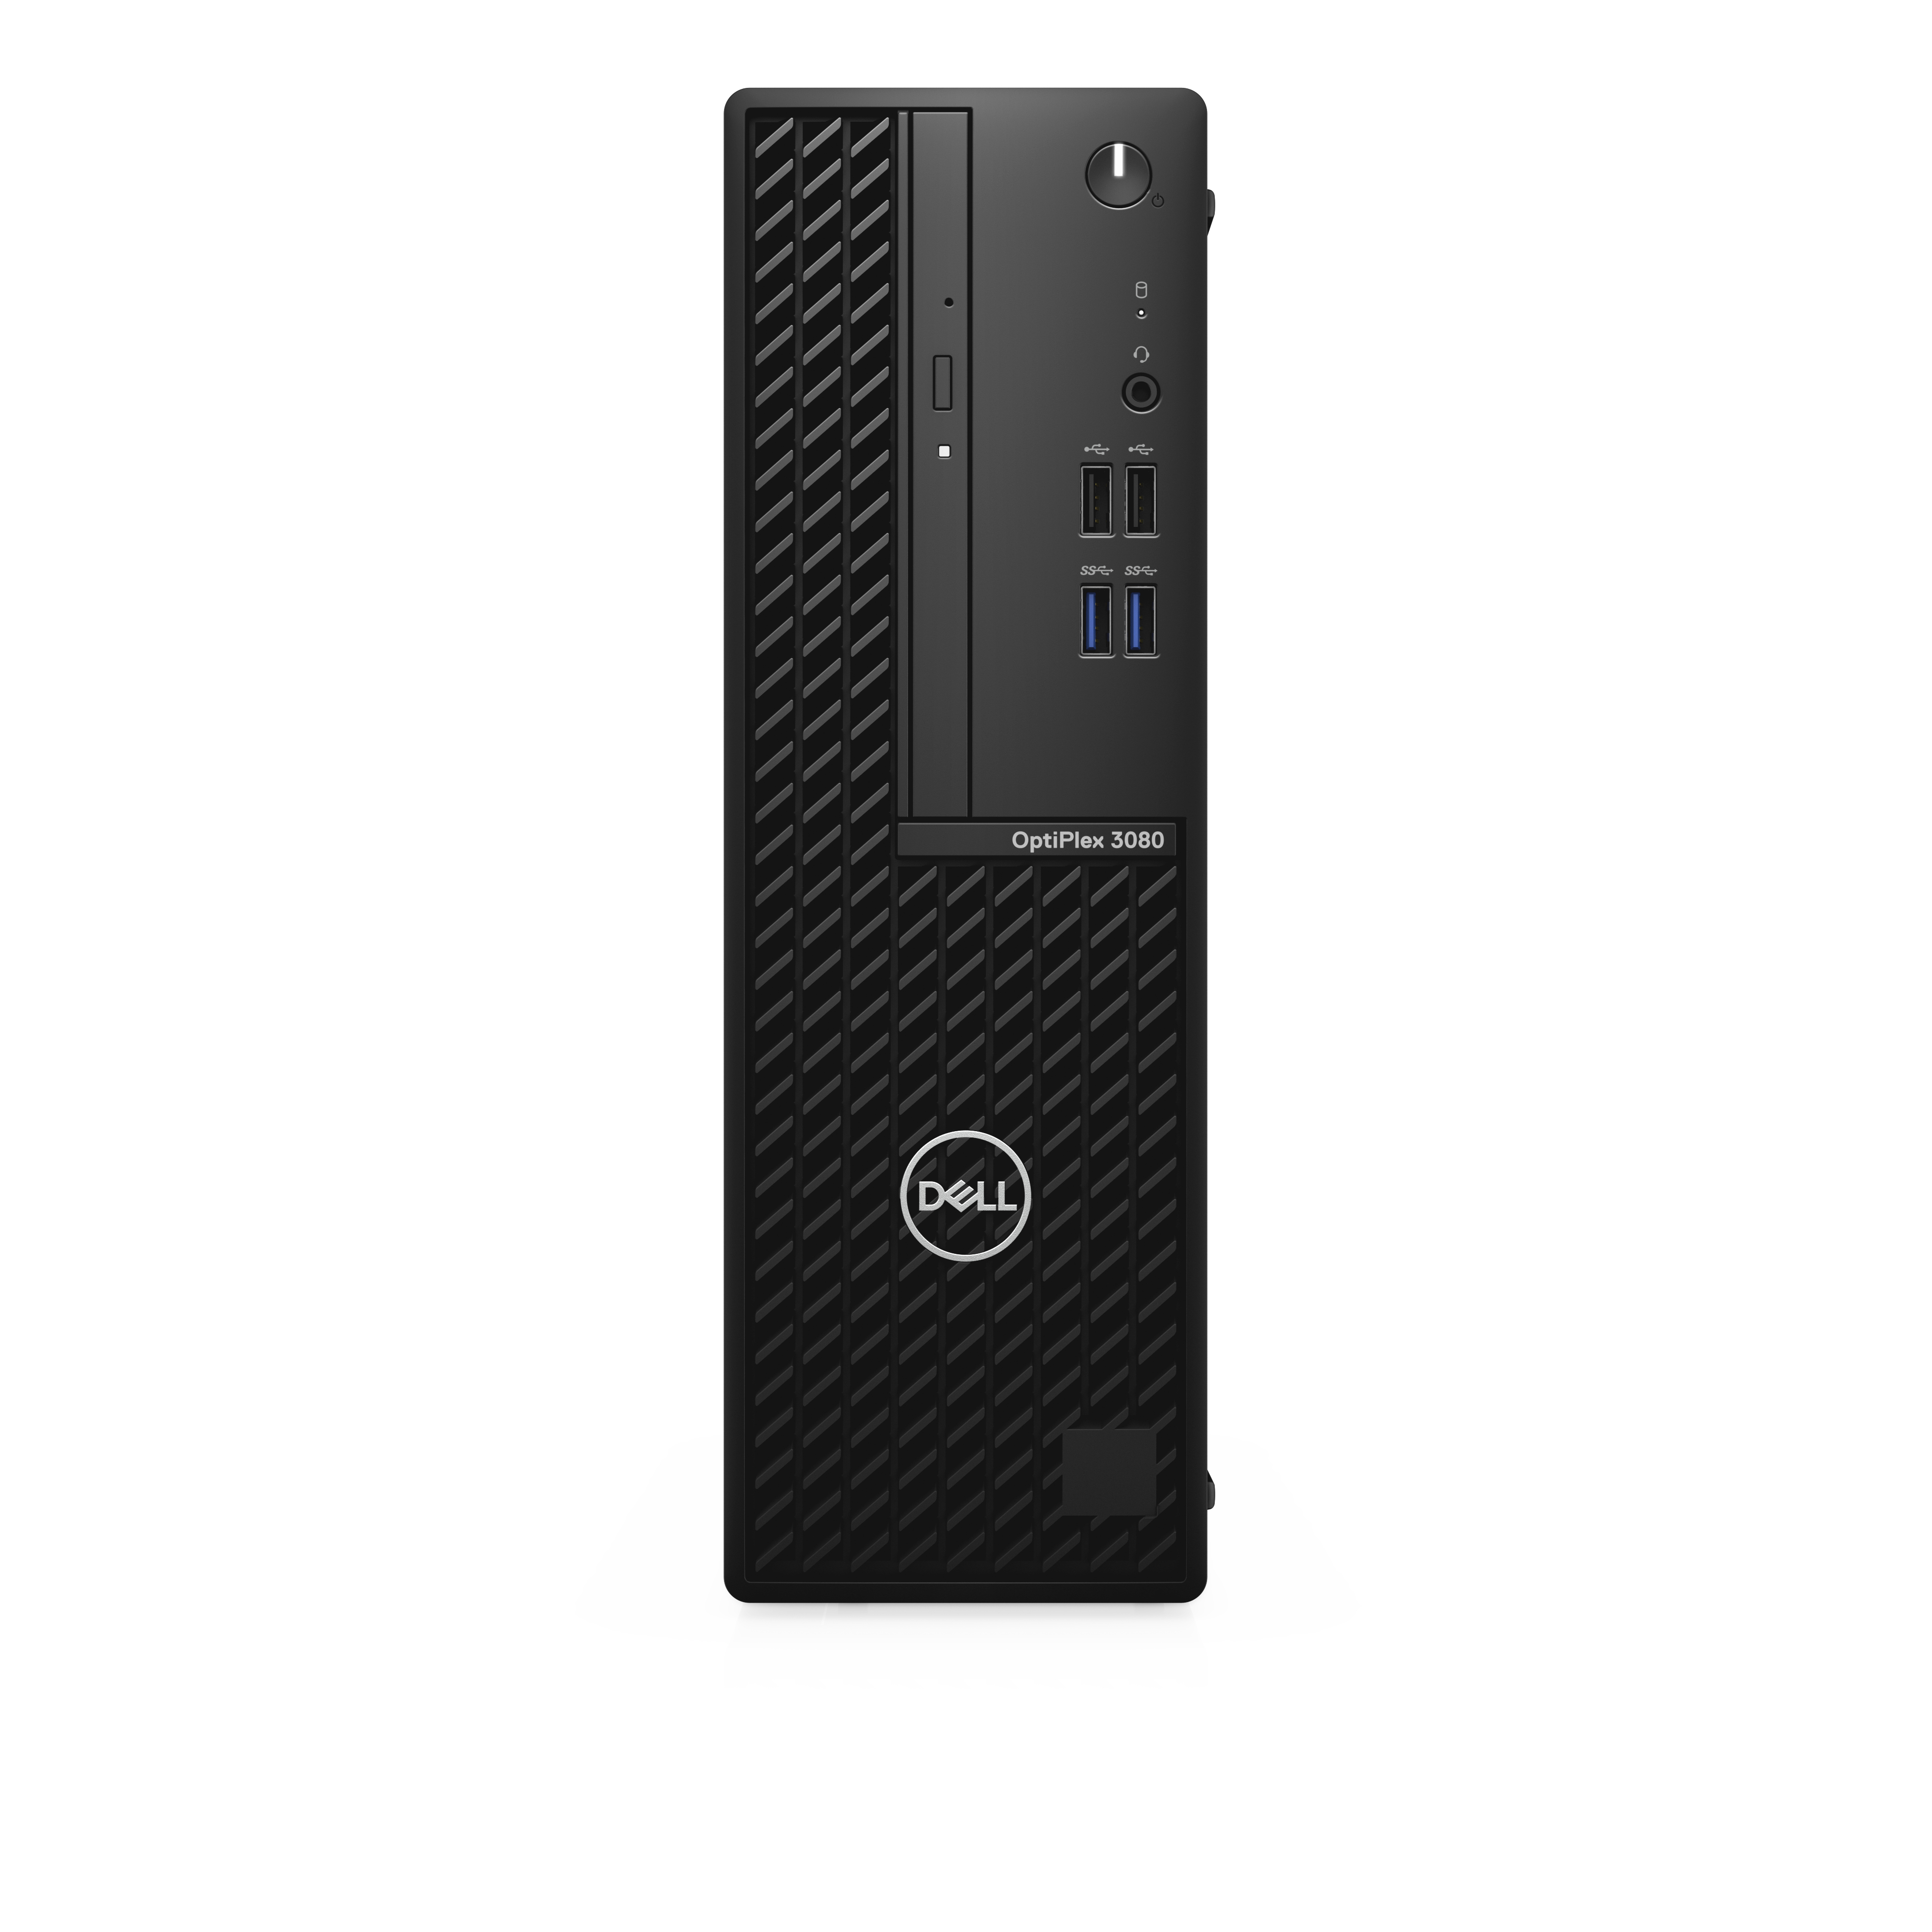 Optiplex 3080 Sff Core I5 10505 / 3.2 Ghz Ram 8 Gb Ssd 256 Gb Nvme, Class 35 Dvd-writer Uhd Graphics 630 Gige Win 10 Pro Monitor: None Keyboard: English Black Bts With 3 - image 1 of 4